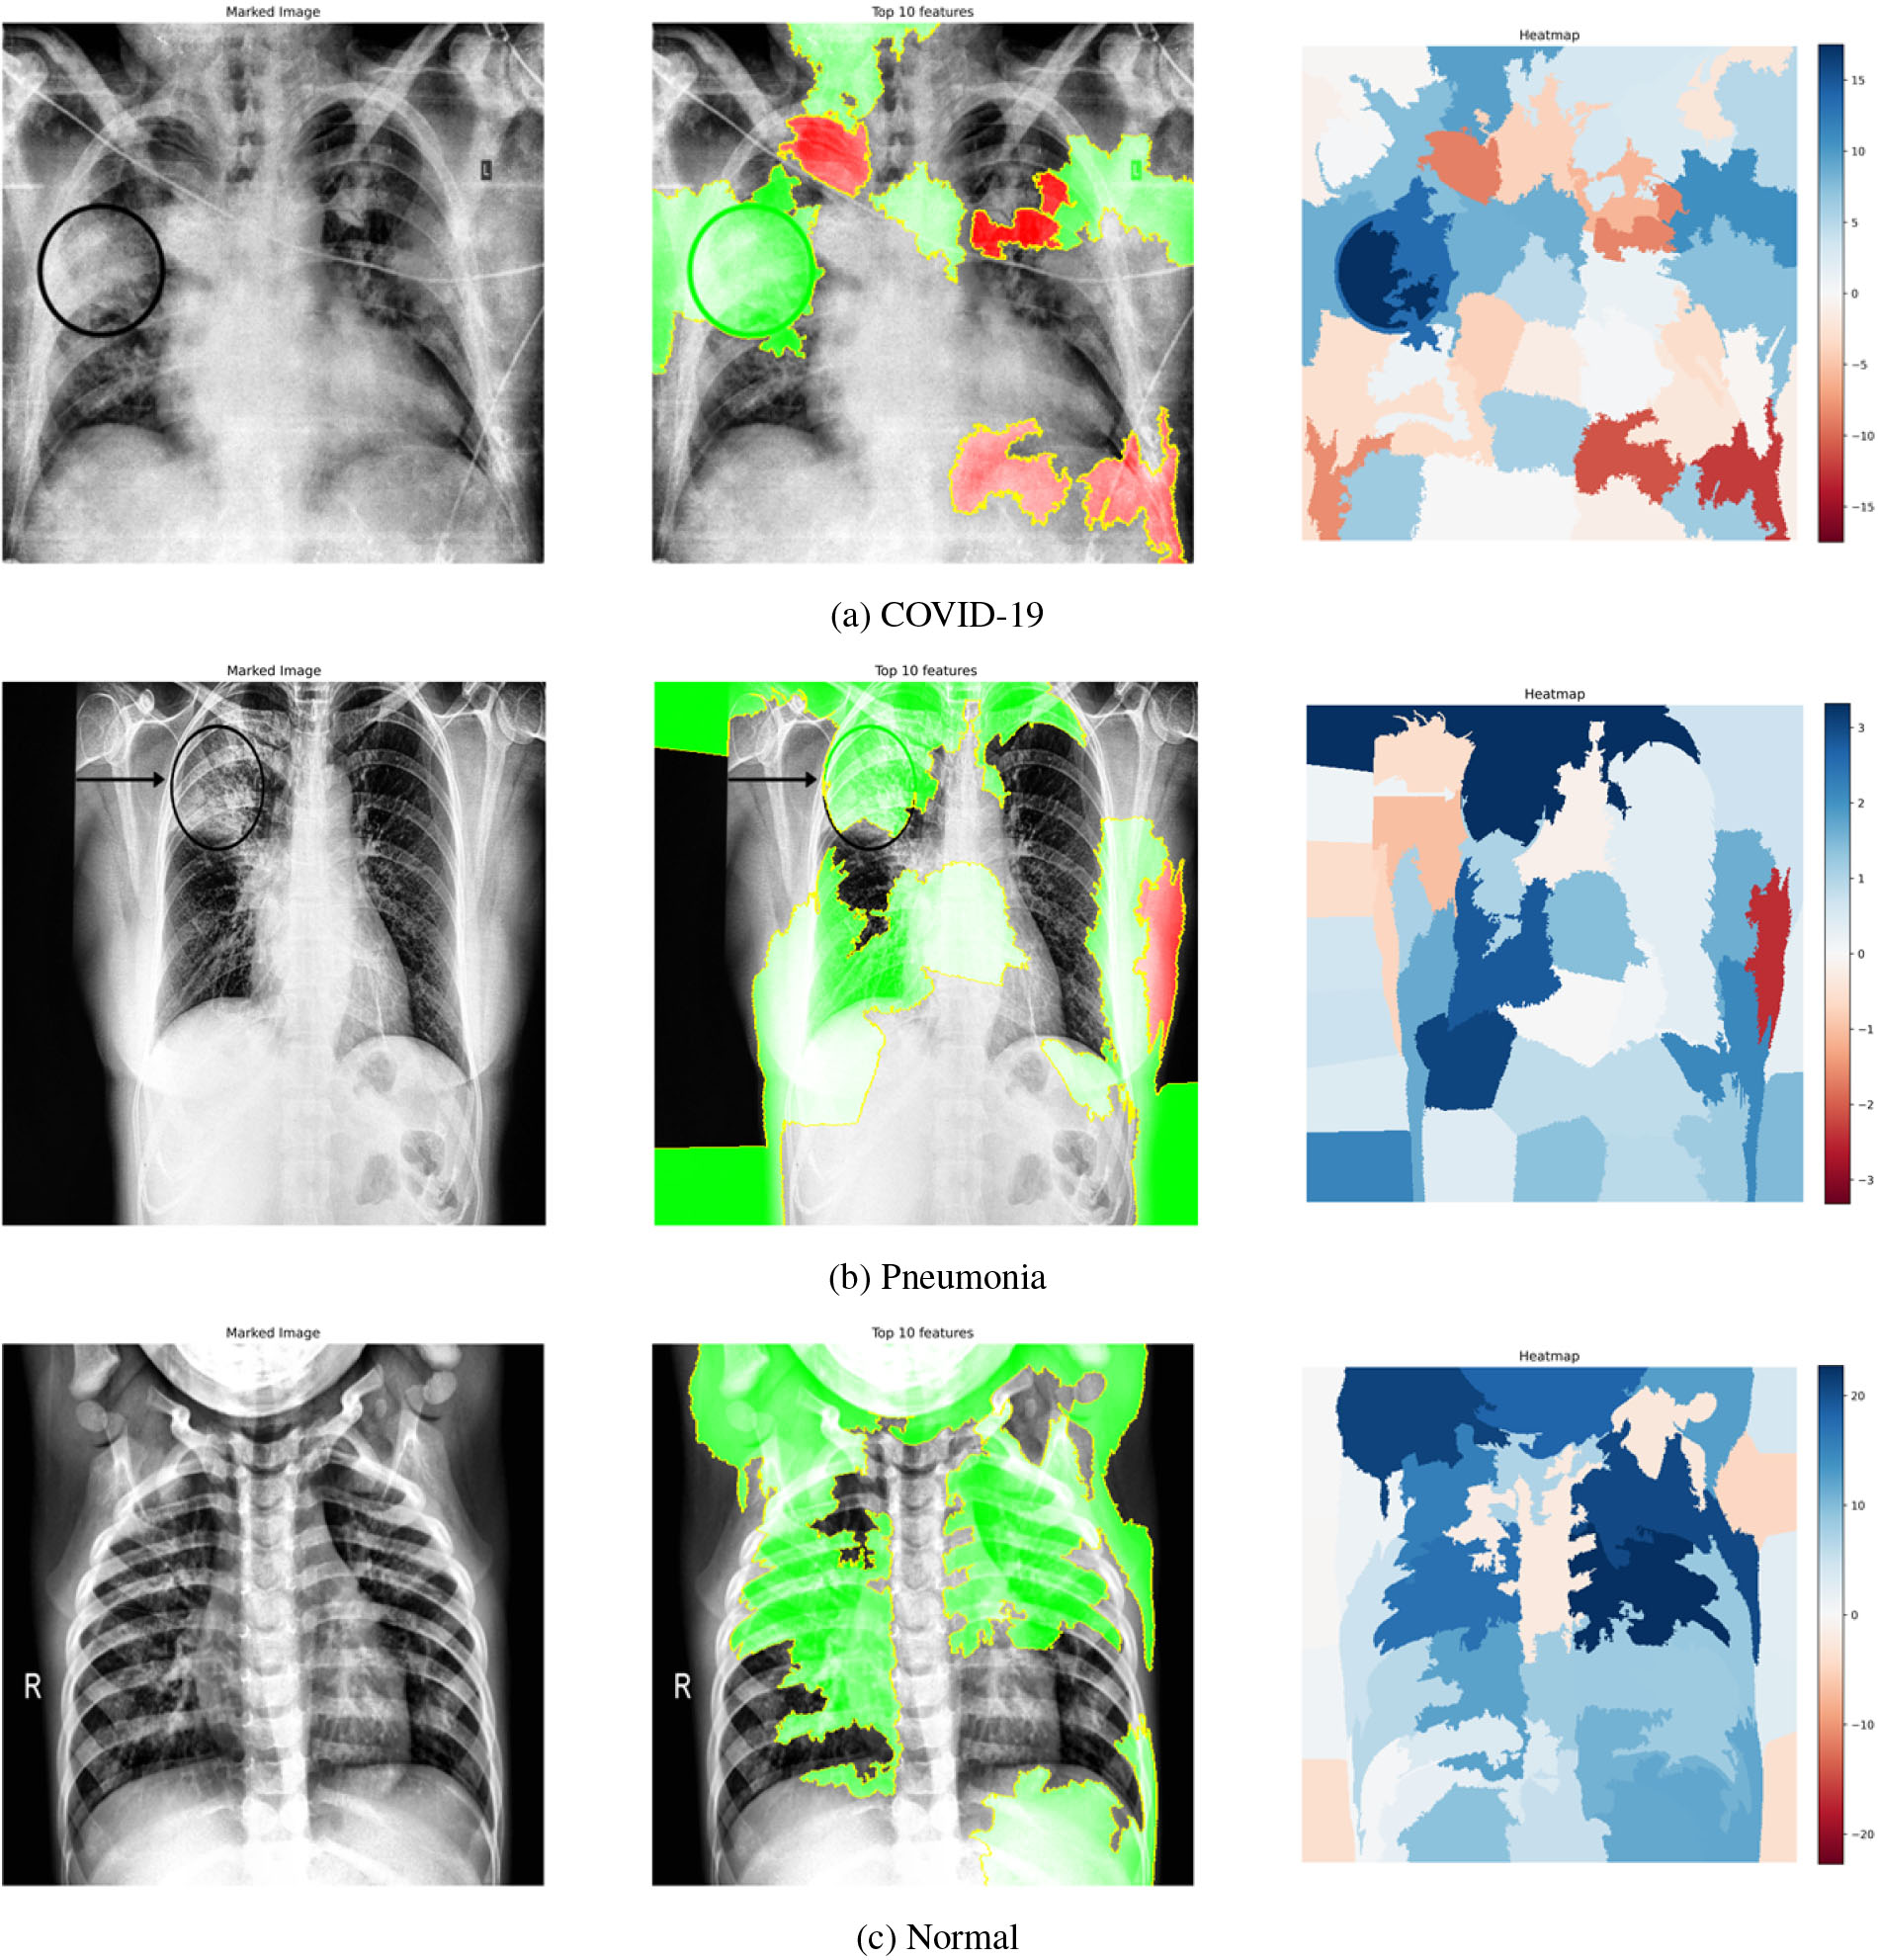 (a)–(c) corresponding to COVID-19, Pneumonia, normal cases, respectively. In each row – the first CXR image depicts the clinically evaluated and manually marked regions, second CXR image highlights the top 10 superpixels obtained using LIME, and the third image is the LIME generated heatmap corresponding to the second image.